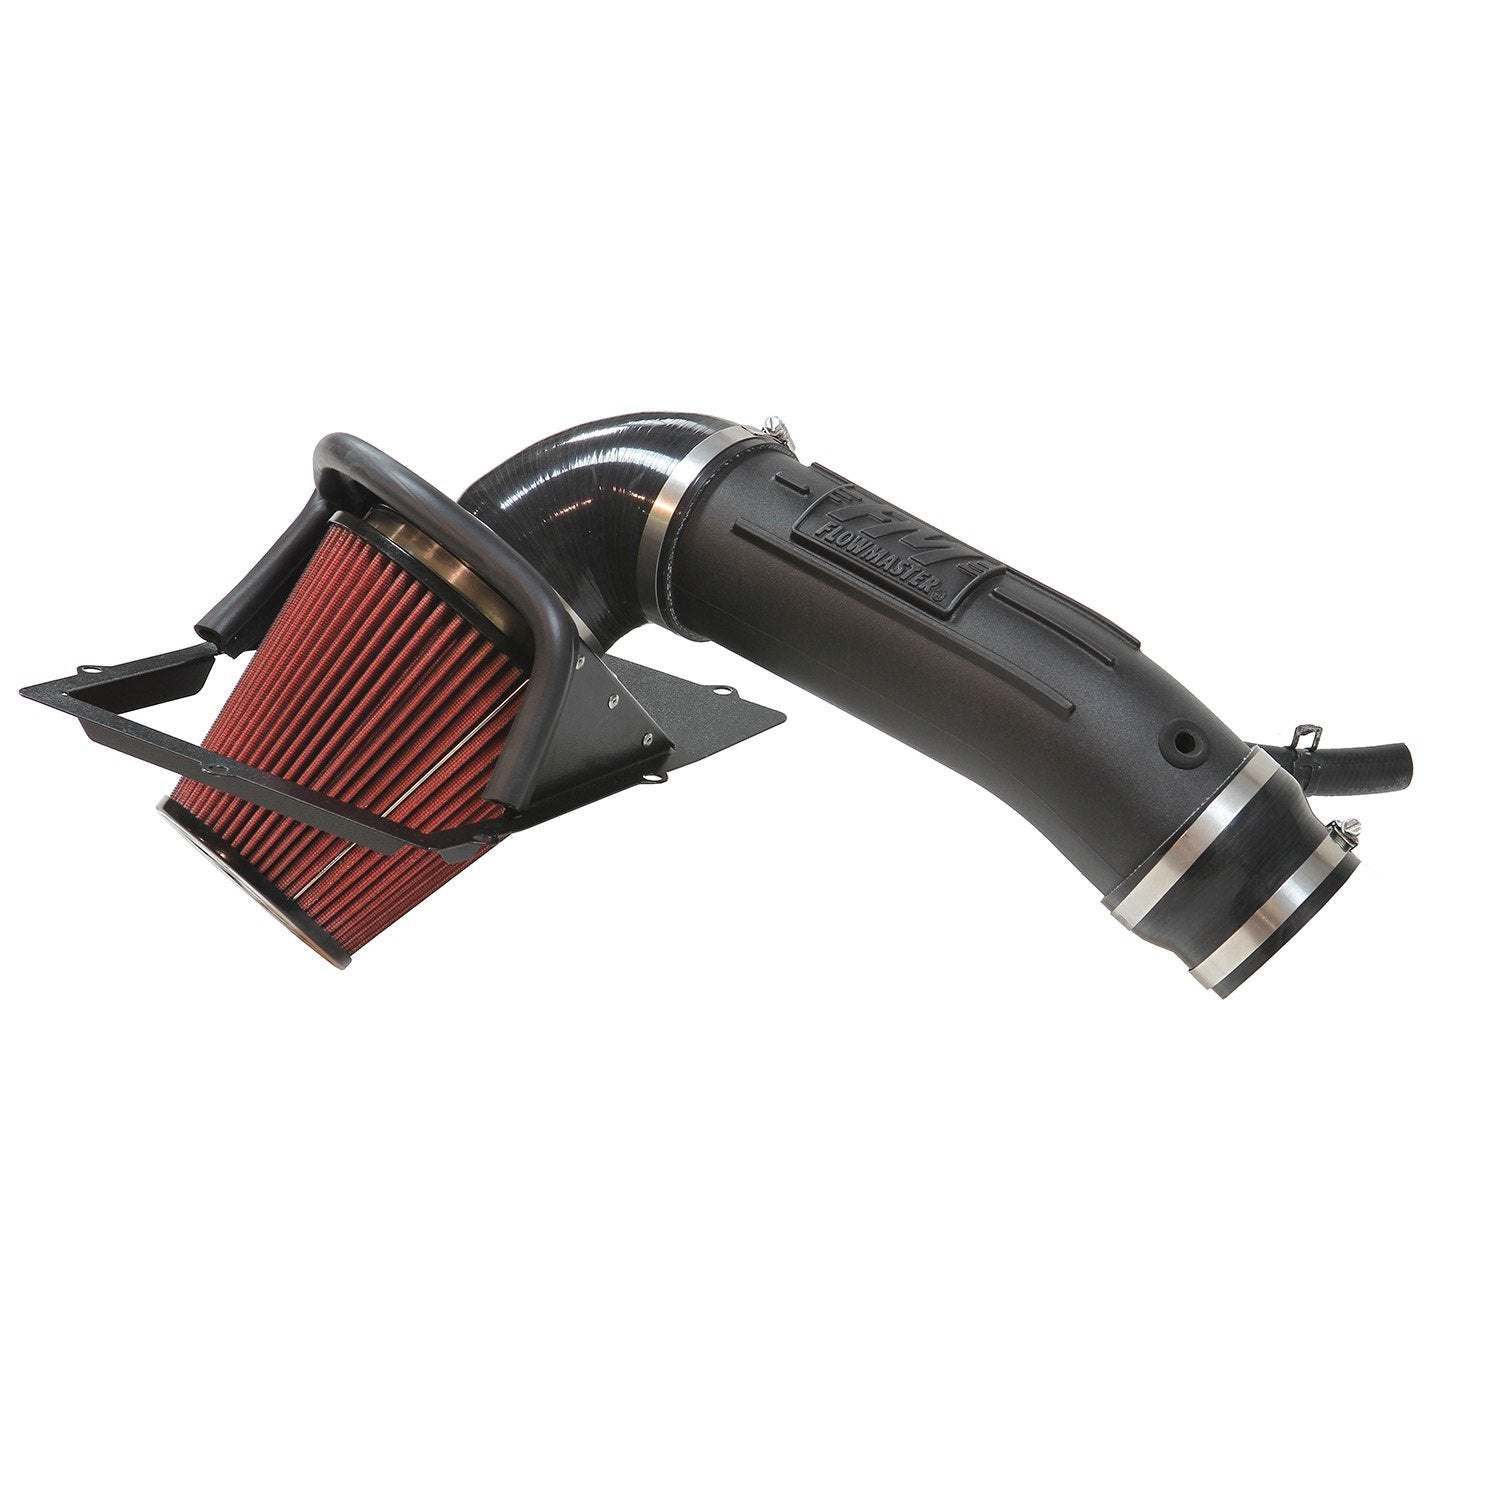 Flowmaster Cold Air Intake 19- Ram 2500 6.4L Air Cleaners, Filters, Intakes and Components Air Cleaner Assemblies and Air Intake Kits main image